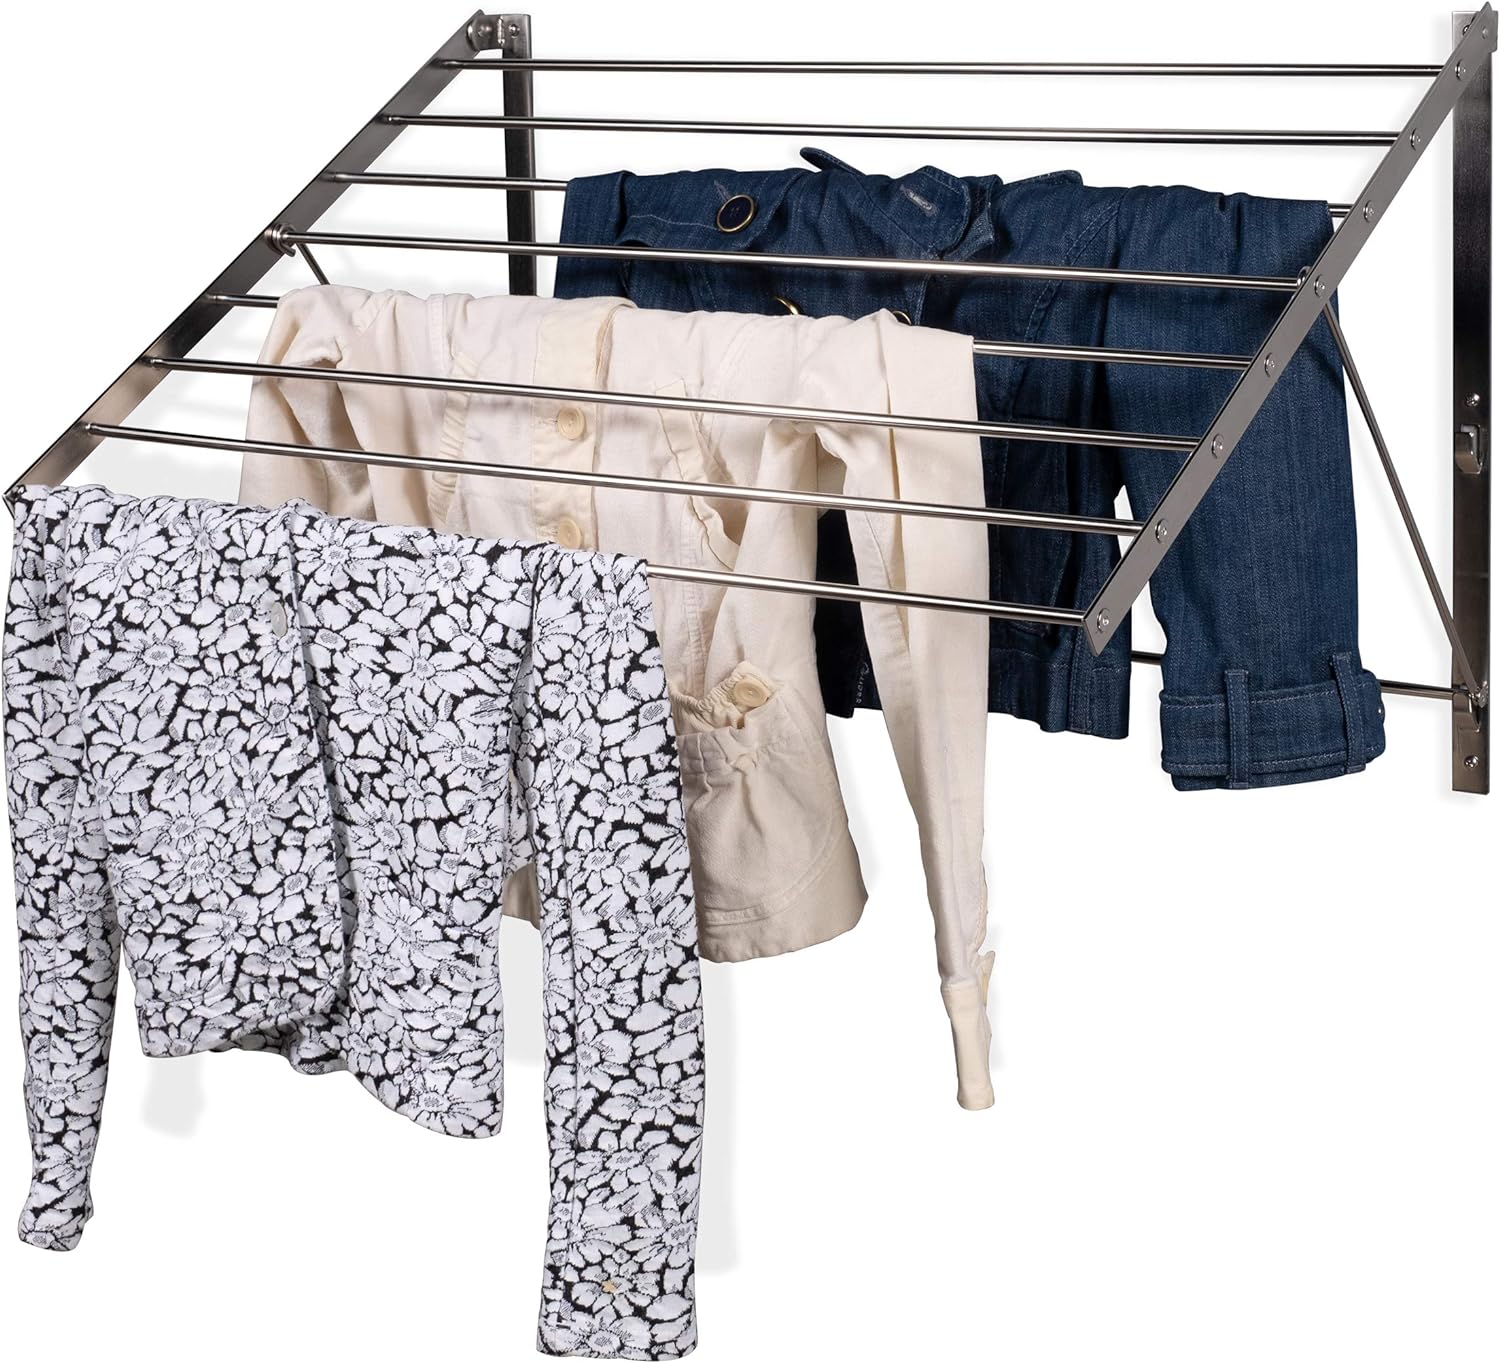 Wall Mounted Clothes Drying Rack For Laundry Room White Small 14" x22" 